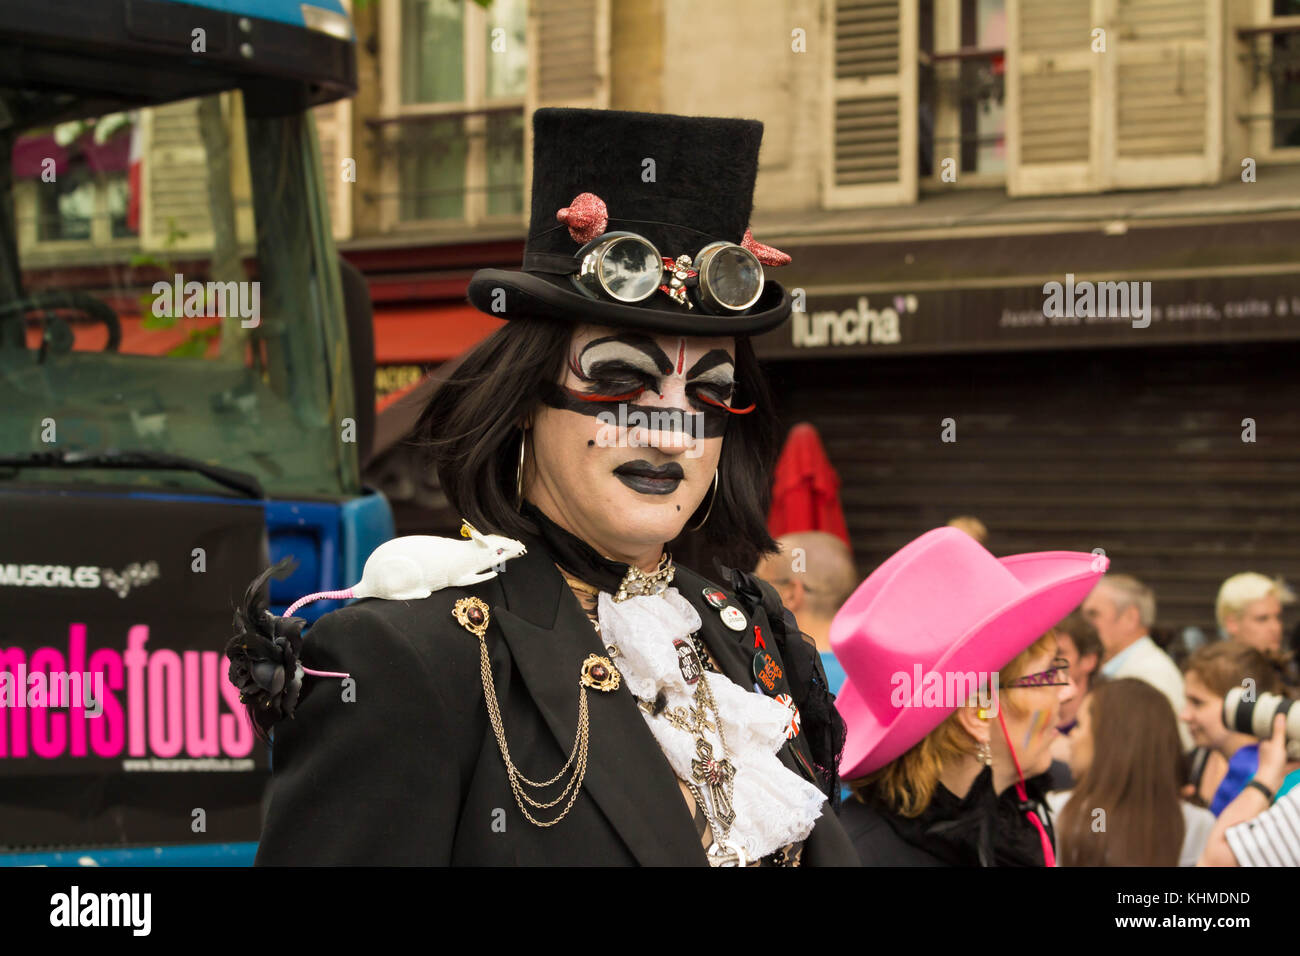 The participant of Gay pride parade in Paris, France. Stock Photo